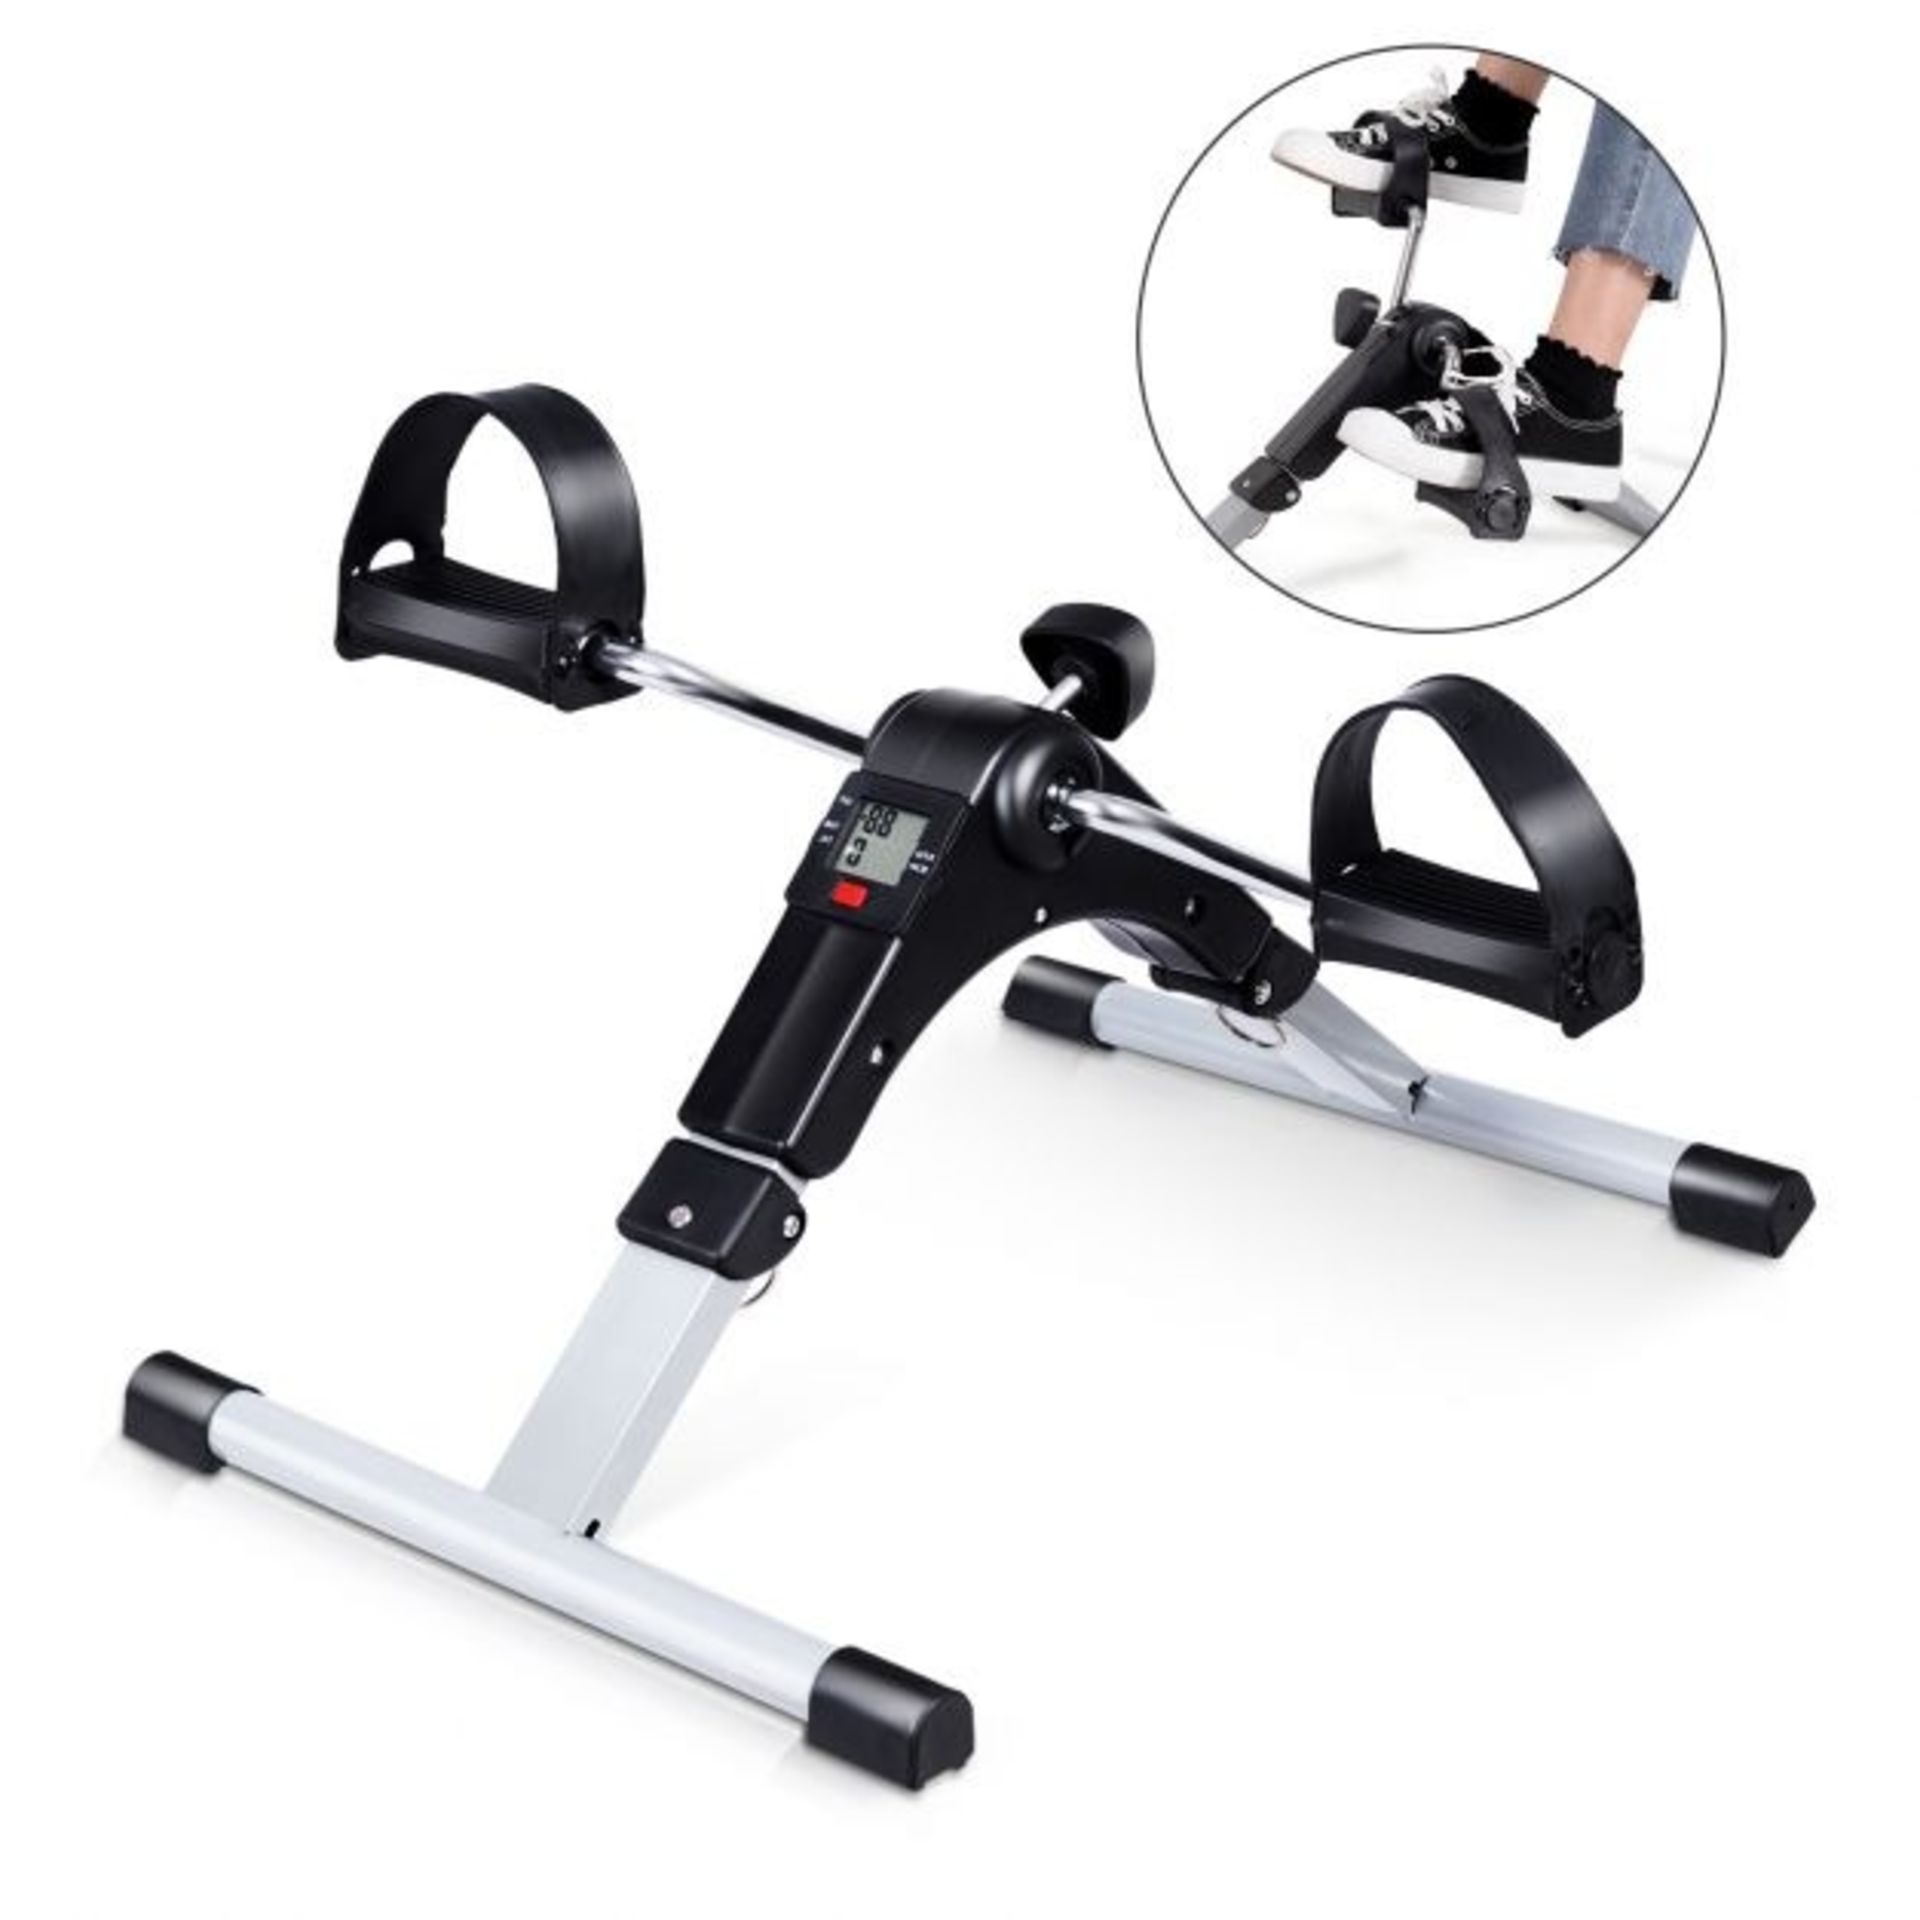 Mini Exercise Bike with Adjustable Resistance and LCD Screen Display - ER53